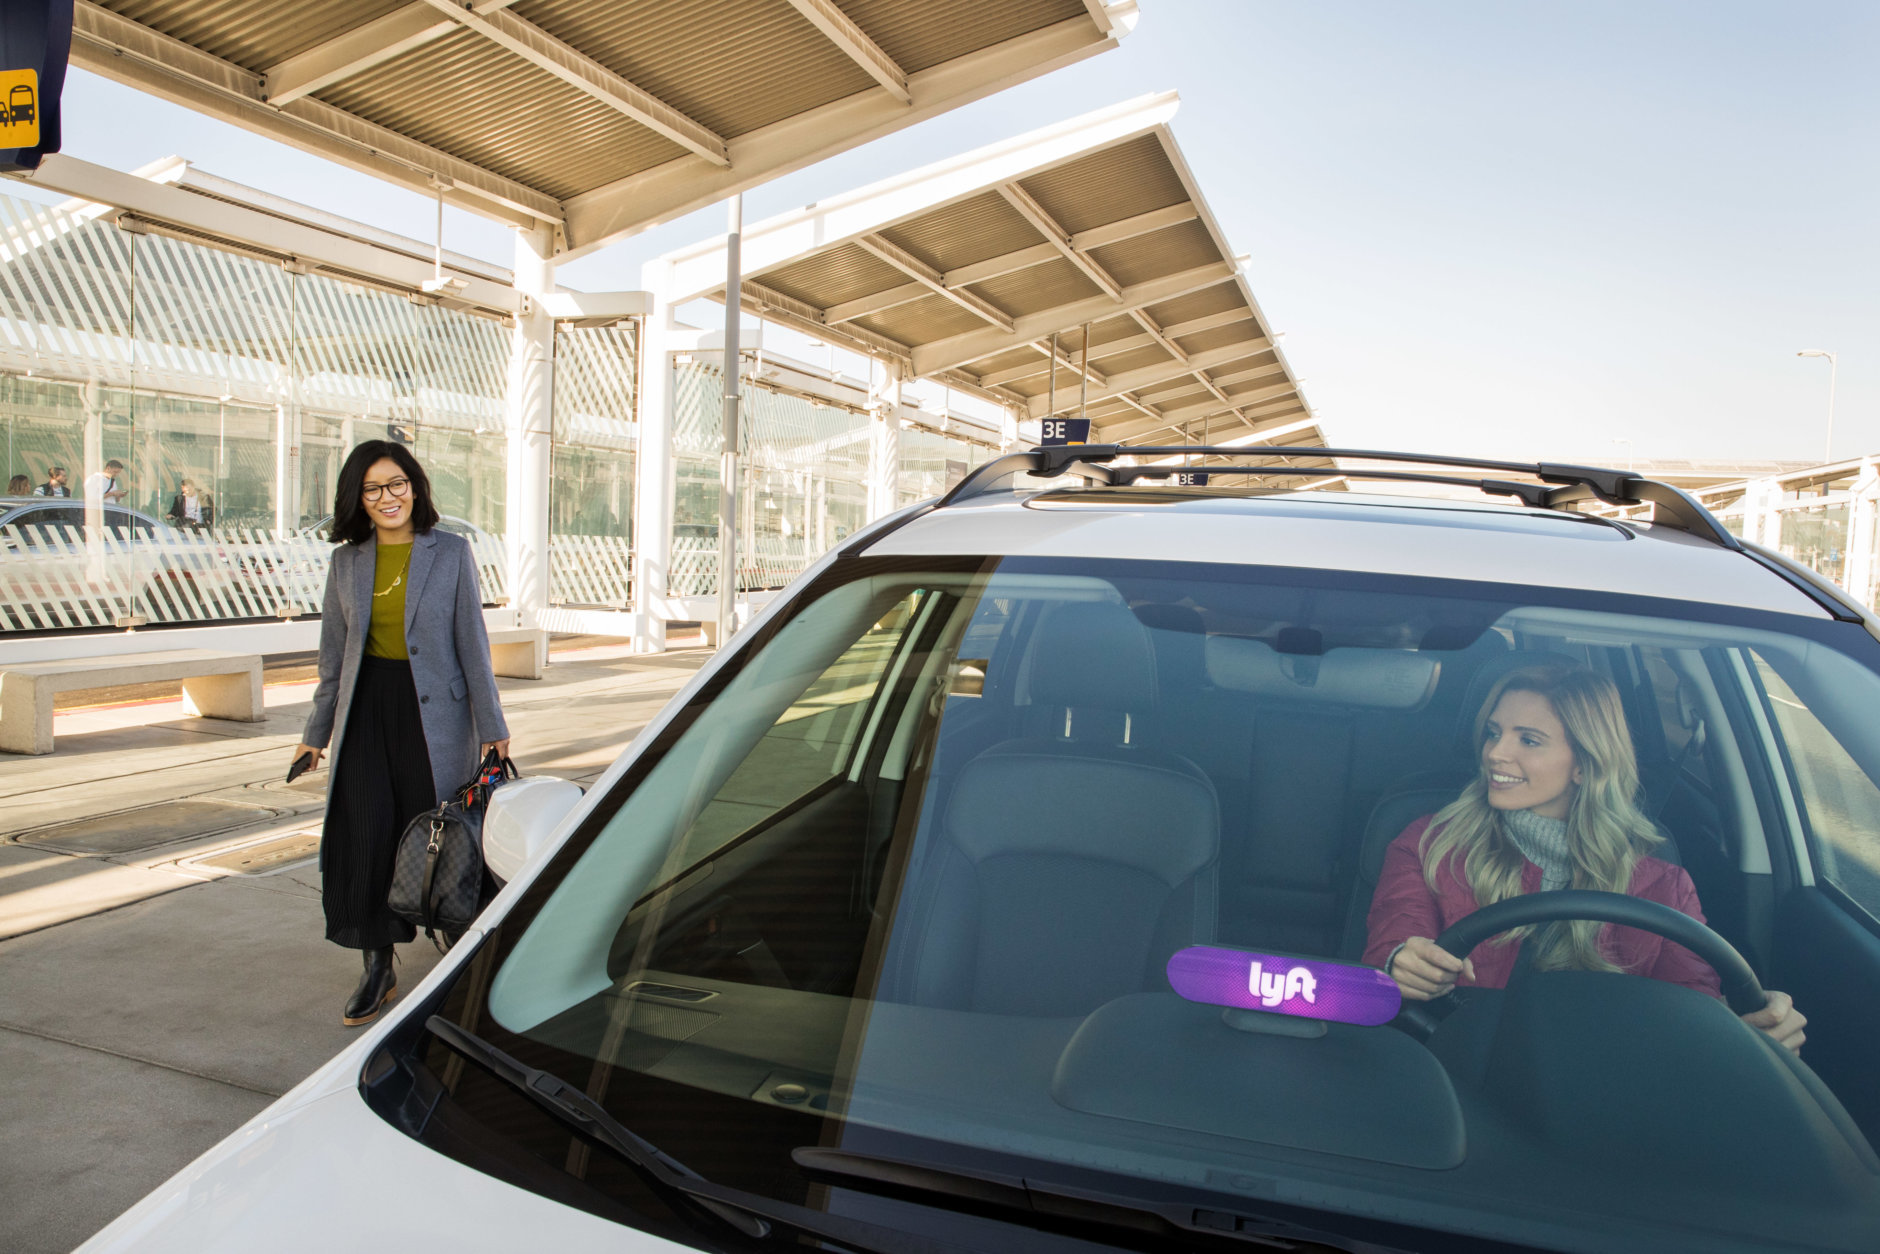 The back of the device also displays messages, updating drivers when new passengers are added to their queue, welcoming passengers by name, and providing support to deaf or hard-of-hearing passengers by enabling communication between the driver and the Lyft platform. (Courtesy Lyft)